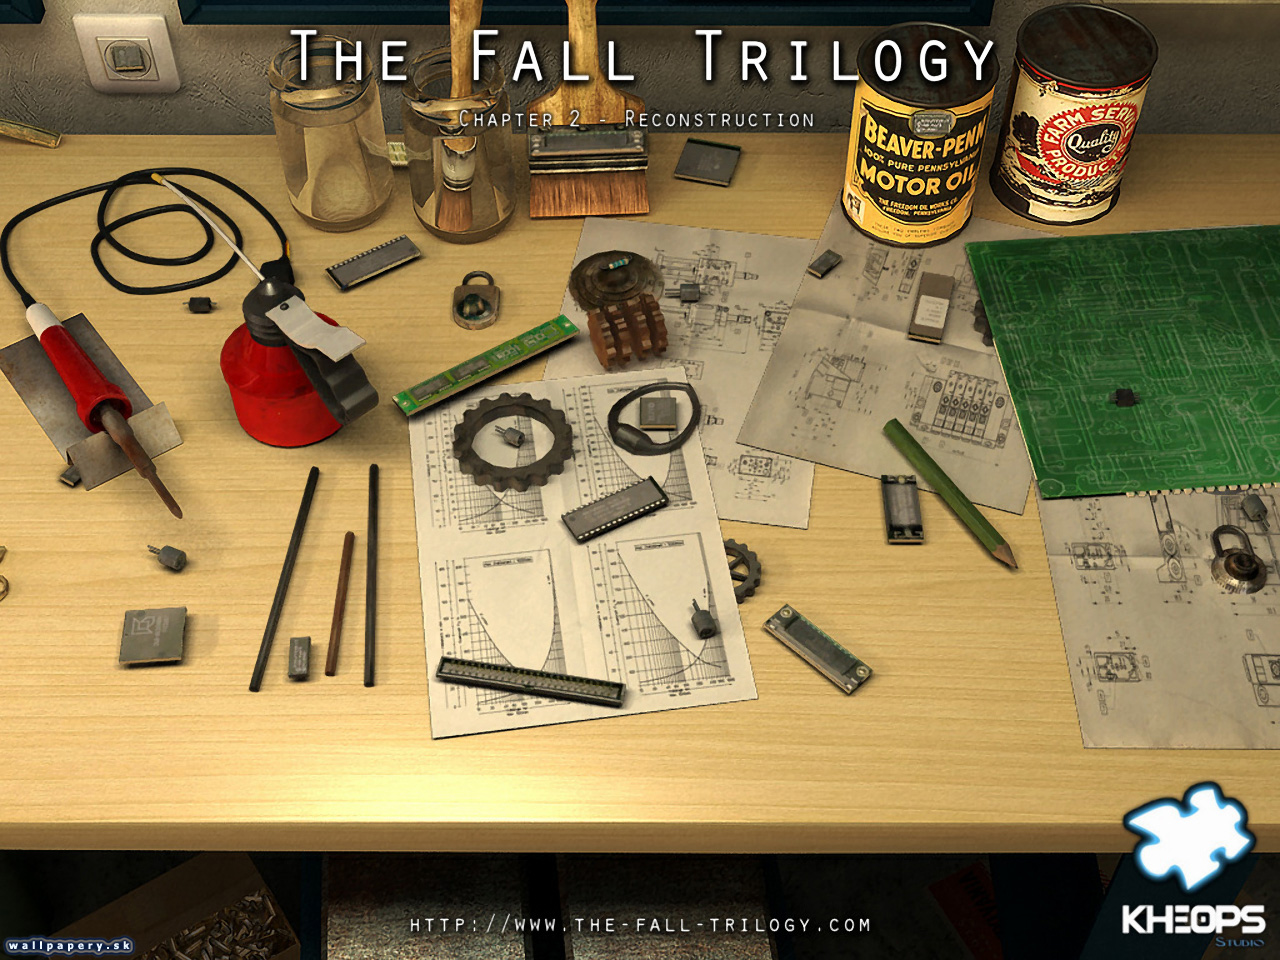 The Fall Trilogy - Chapter 2: Reconstruction - wallpaper 6